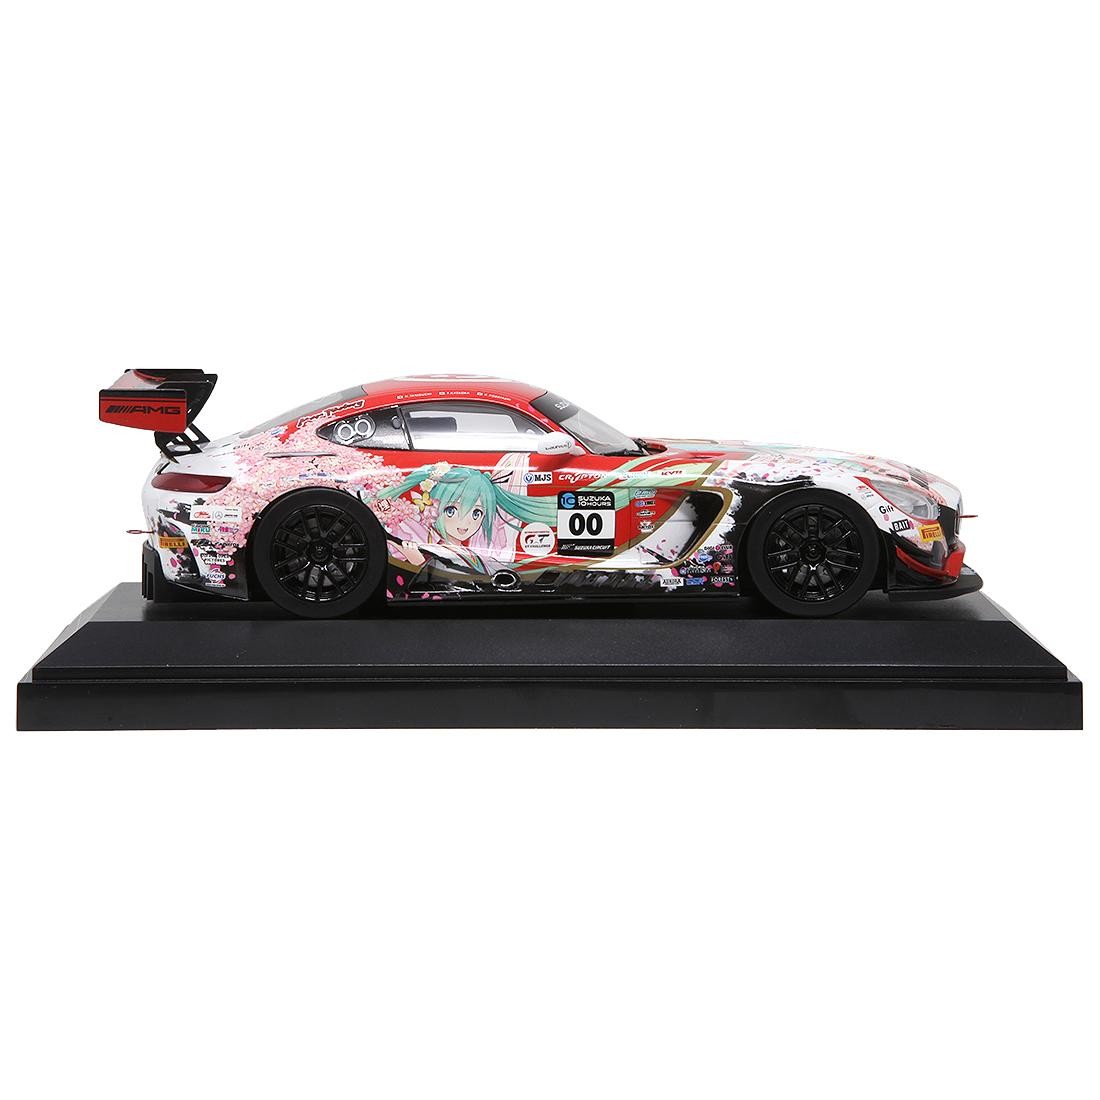 Good Smile Racing Hatsune Miku GT Project Mercedes-AMG 2018 Suzuka 10H Ver.  1/32 Scale (red)